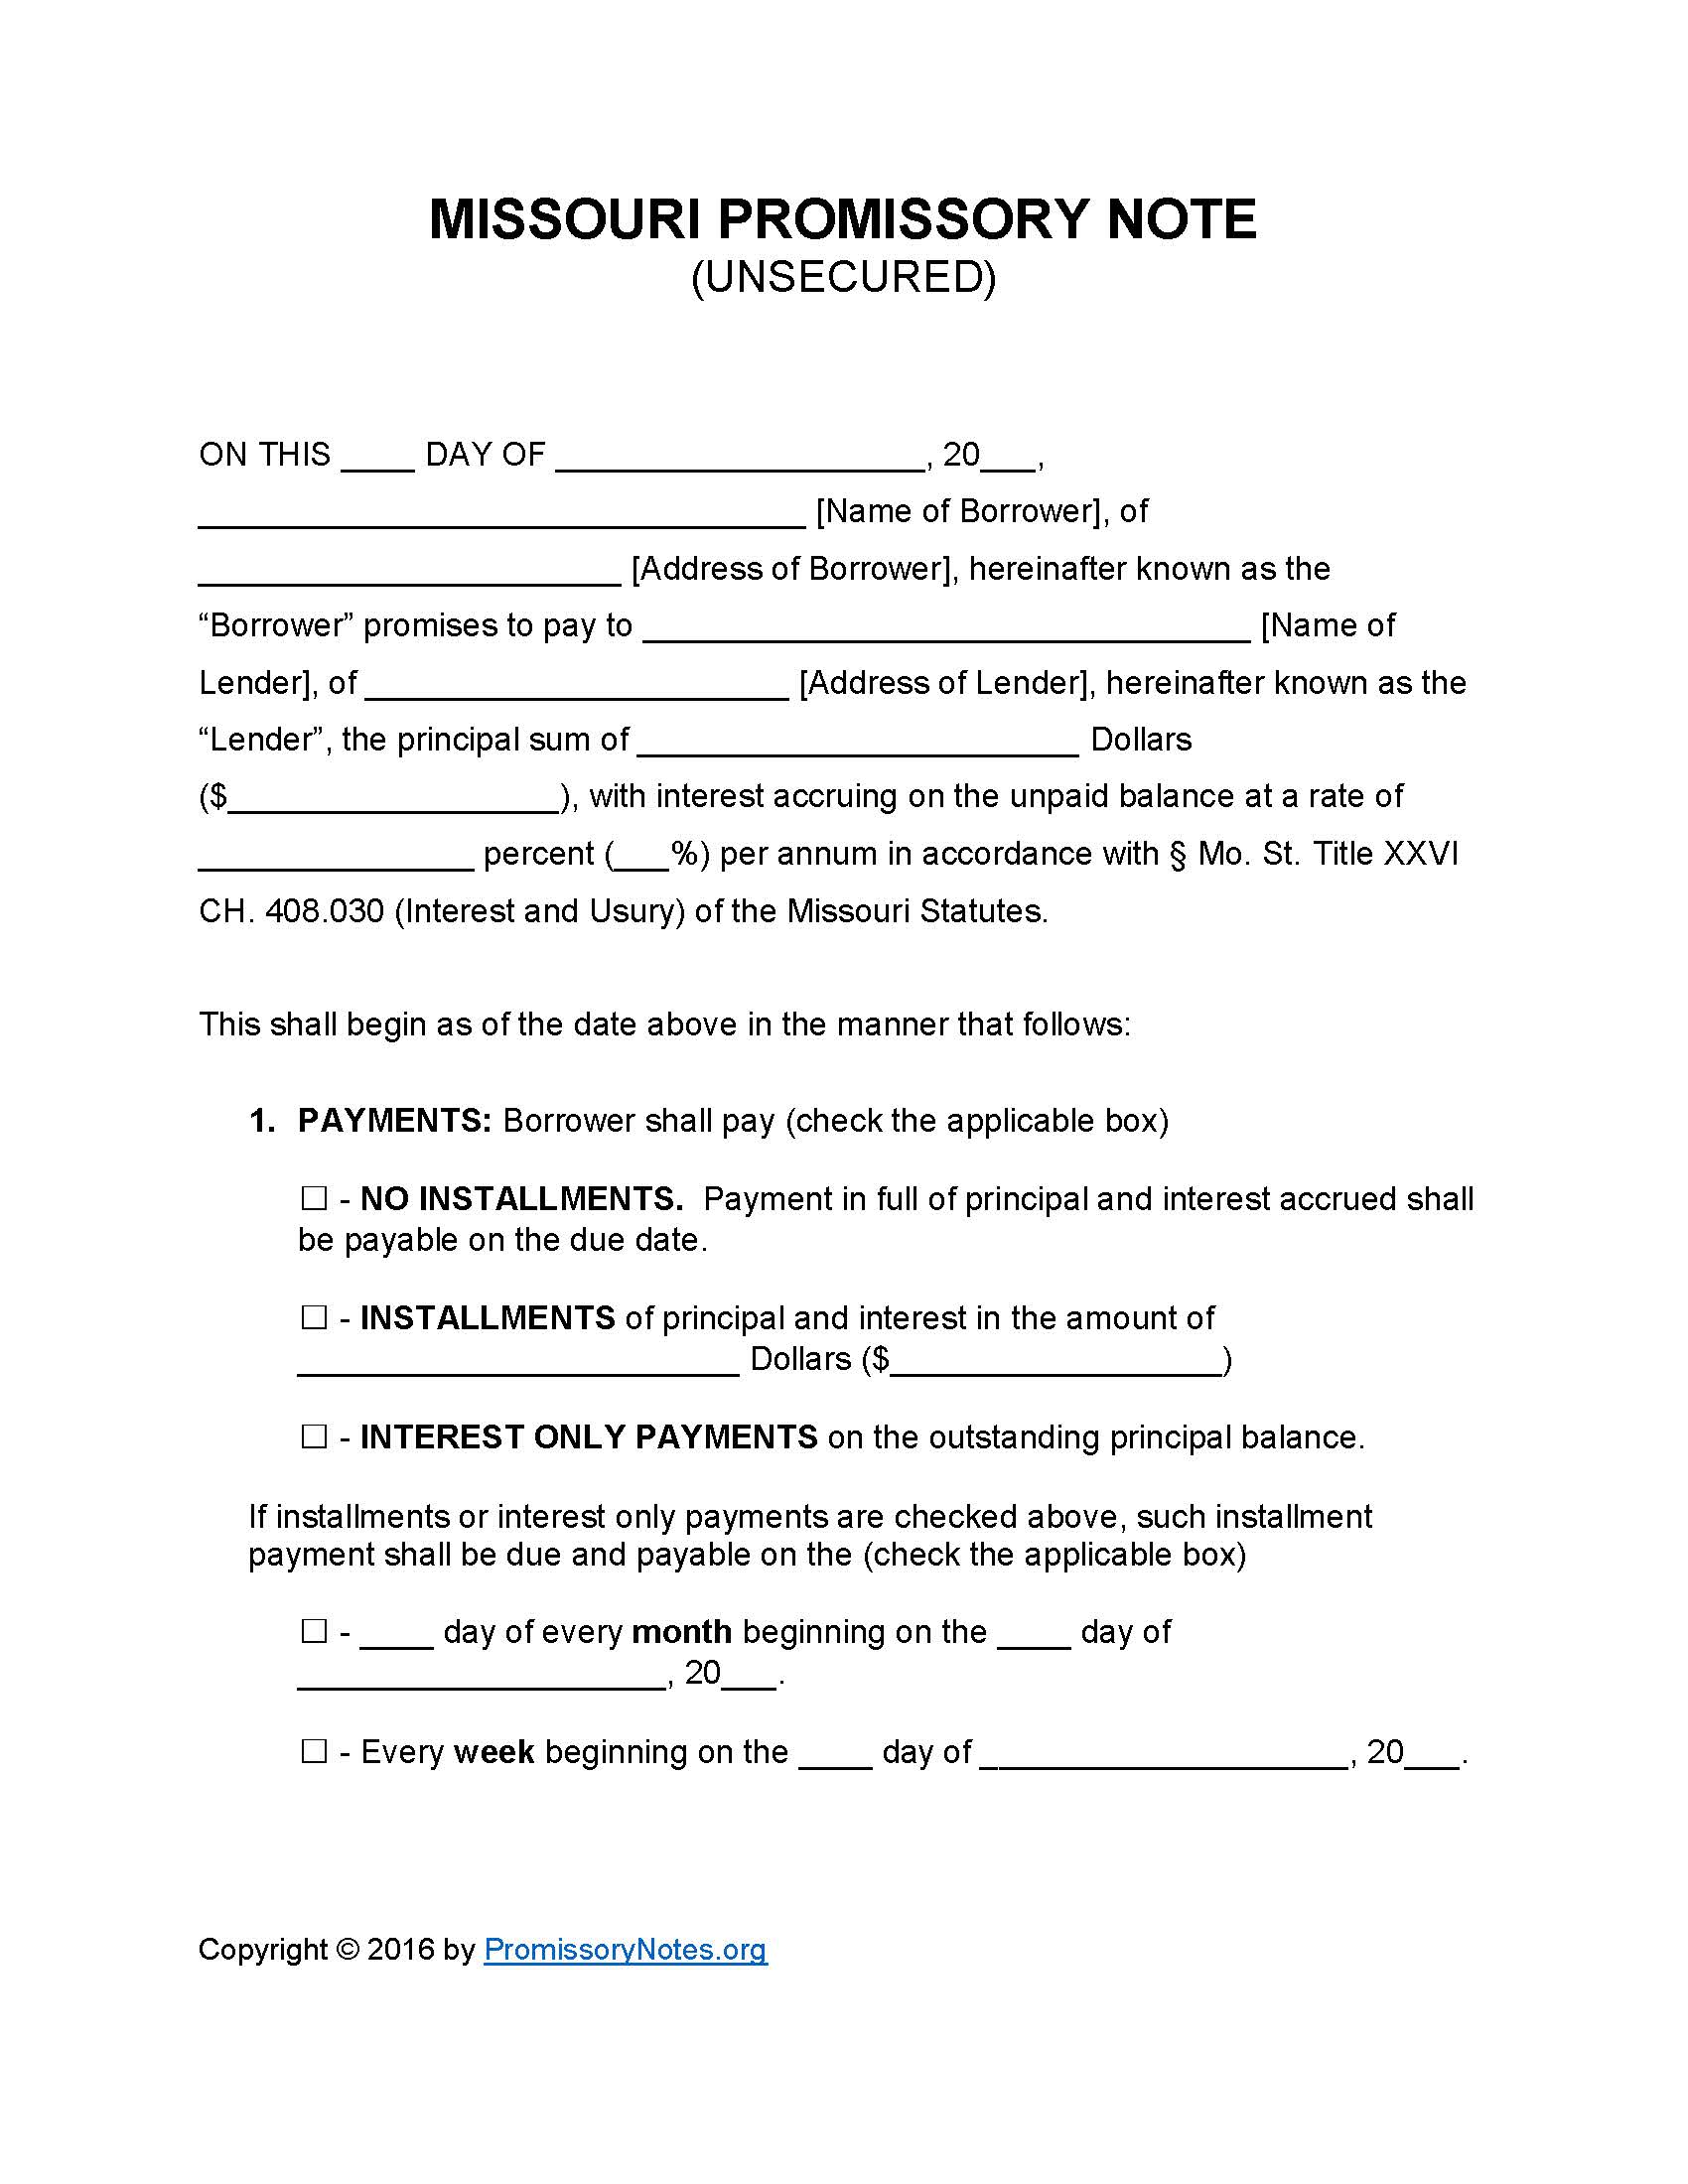 missouri-unsecured-promissory-note-form